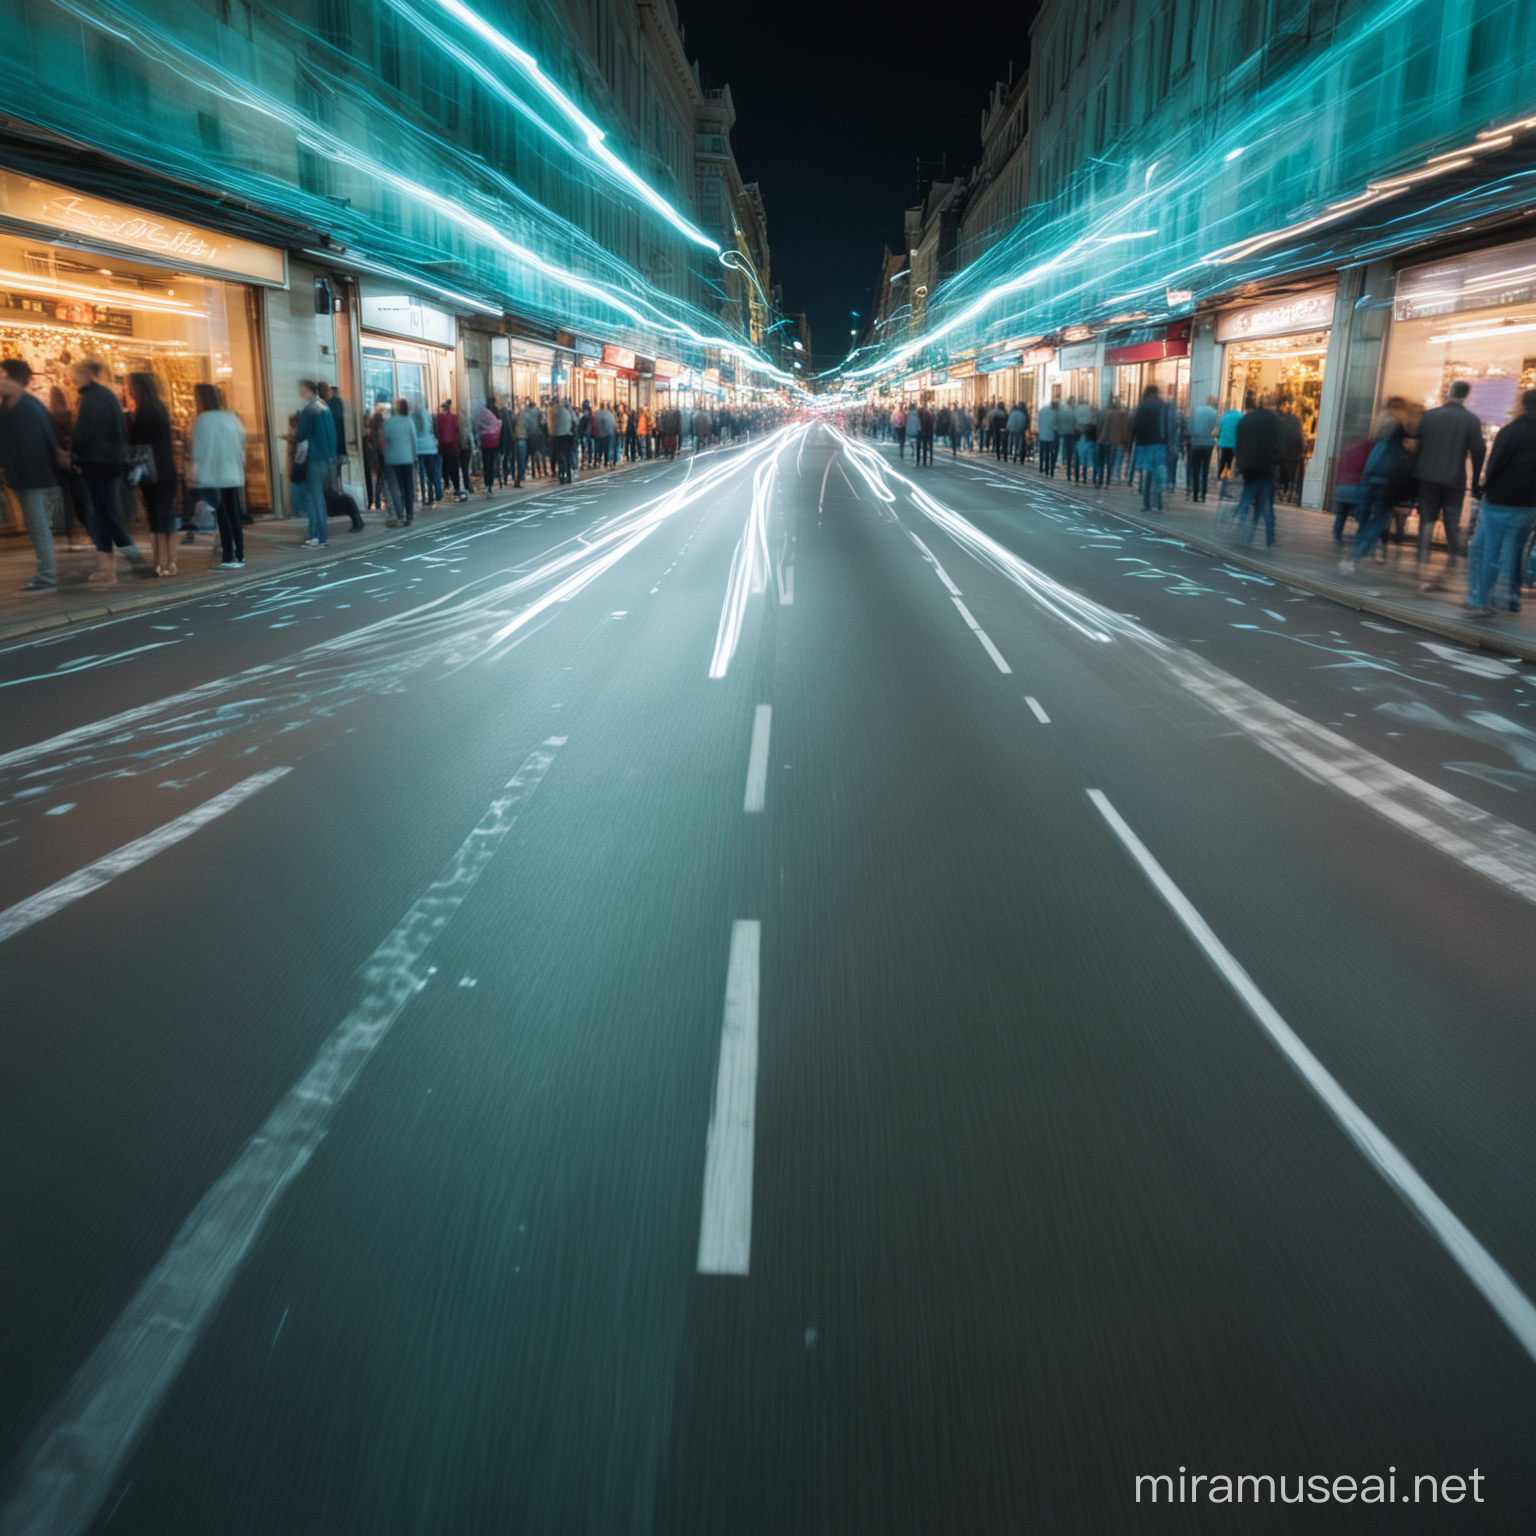 Bustling City Street at Night Captured with Motion Blur and Turquoise Lighting